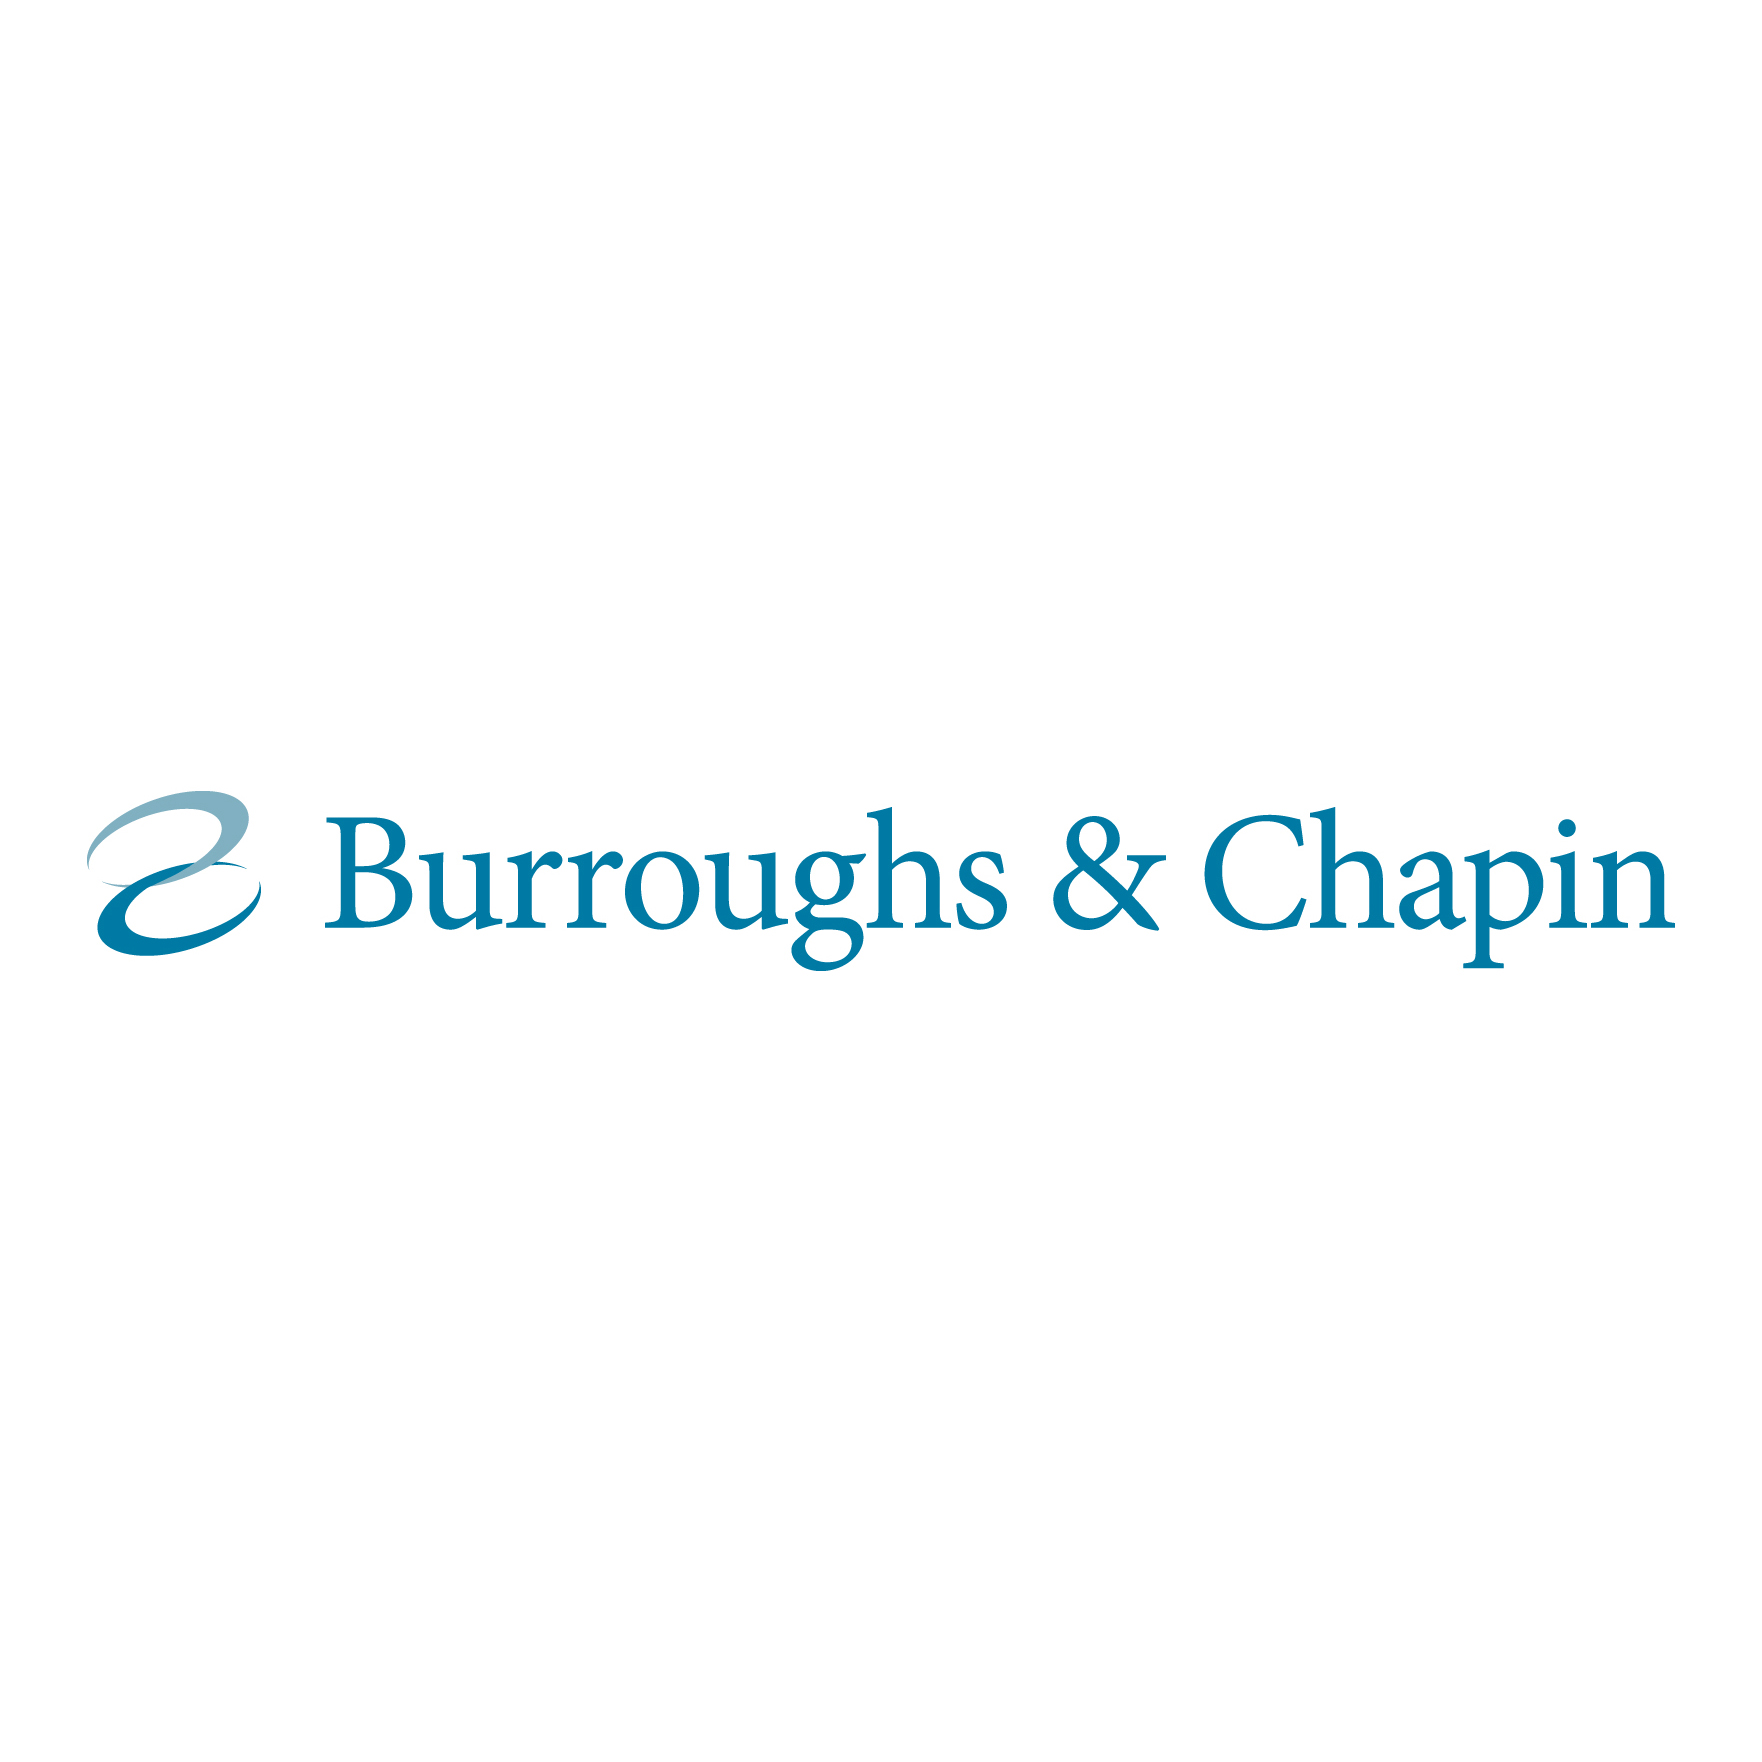 Burroughs & Chapin has made a $500,000 donation to support scholarships for local students who attend Coastal Carolina University. 